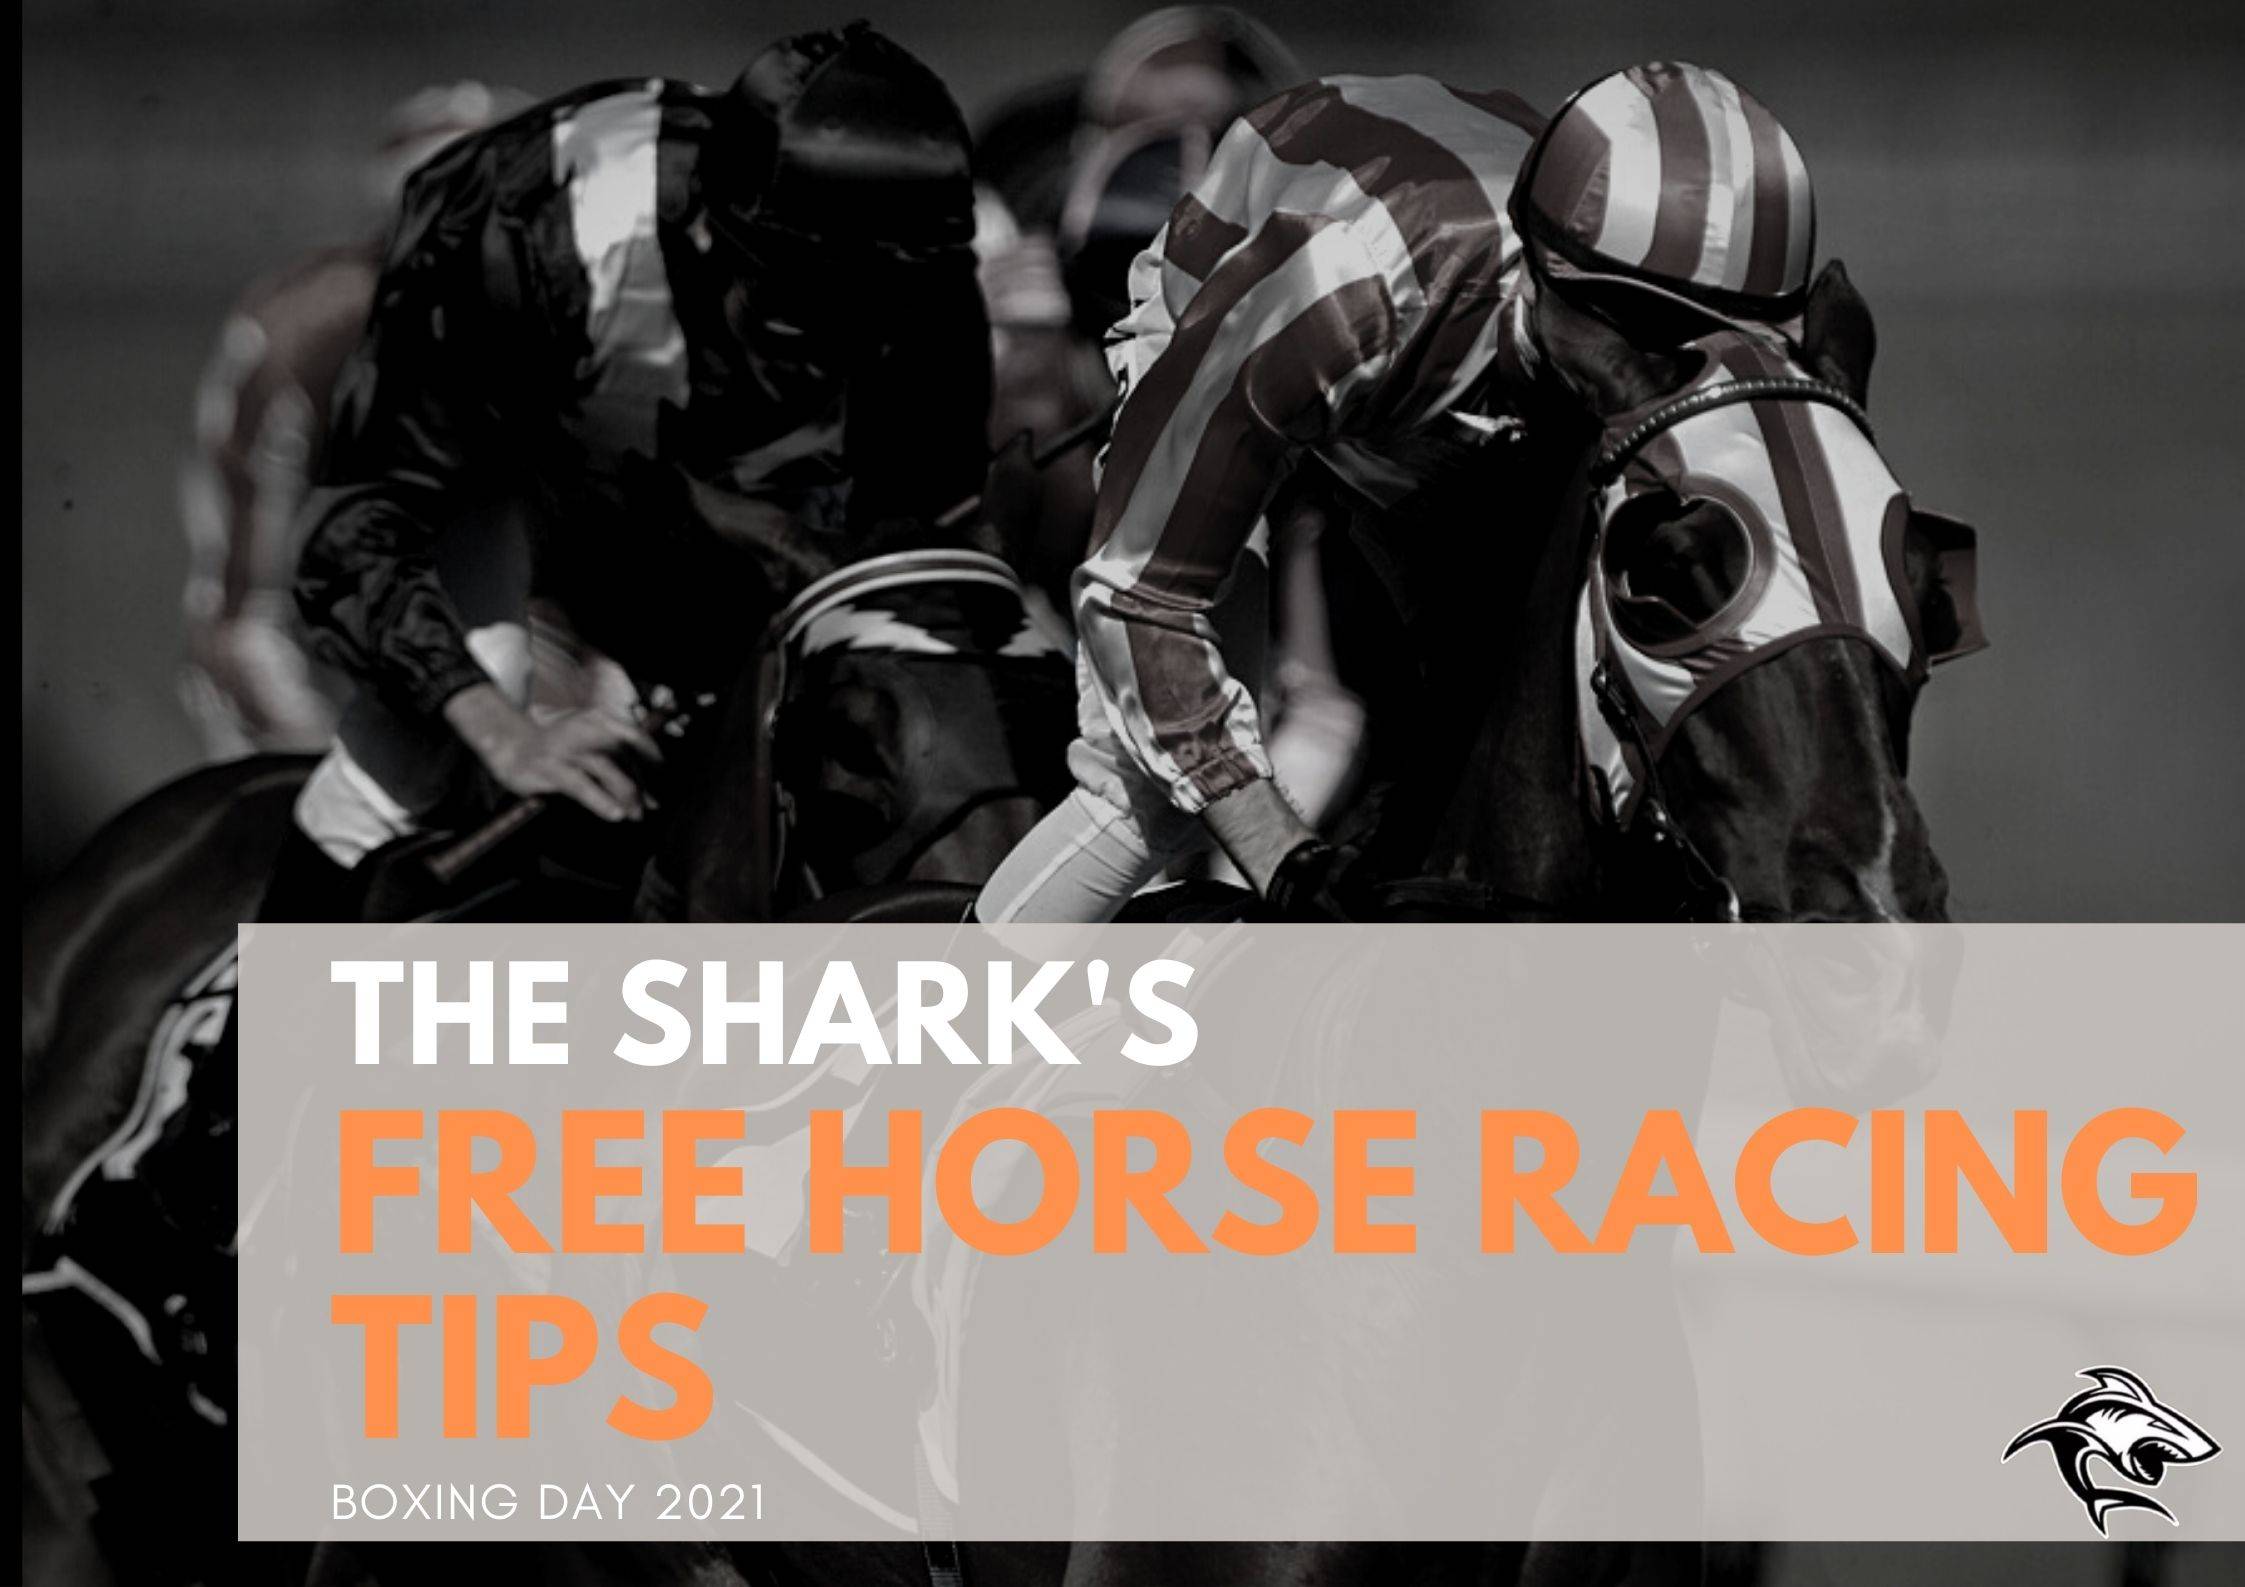 Free Horse Racing Tips - Boxing Day 2021